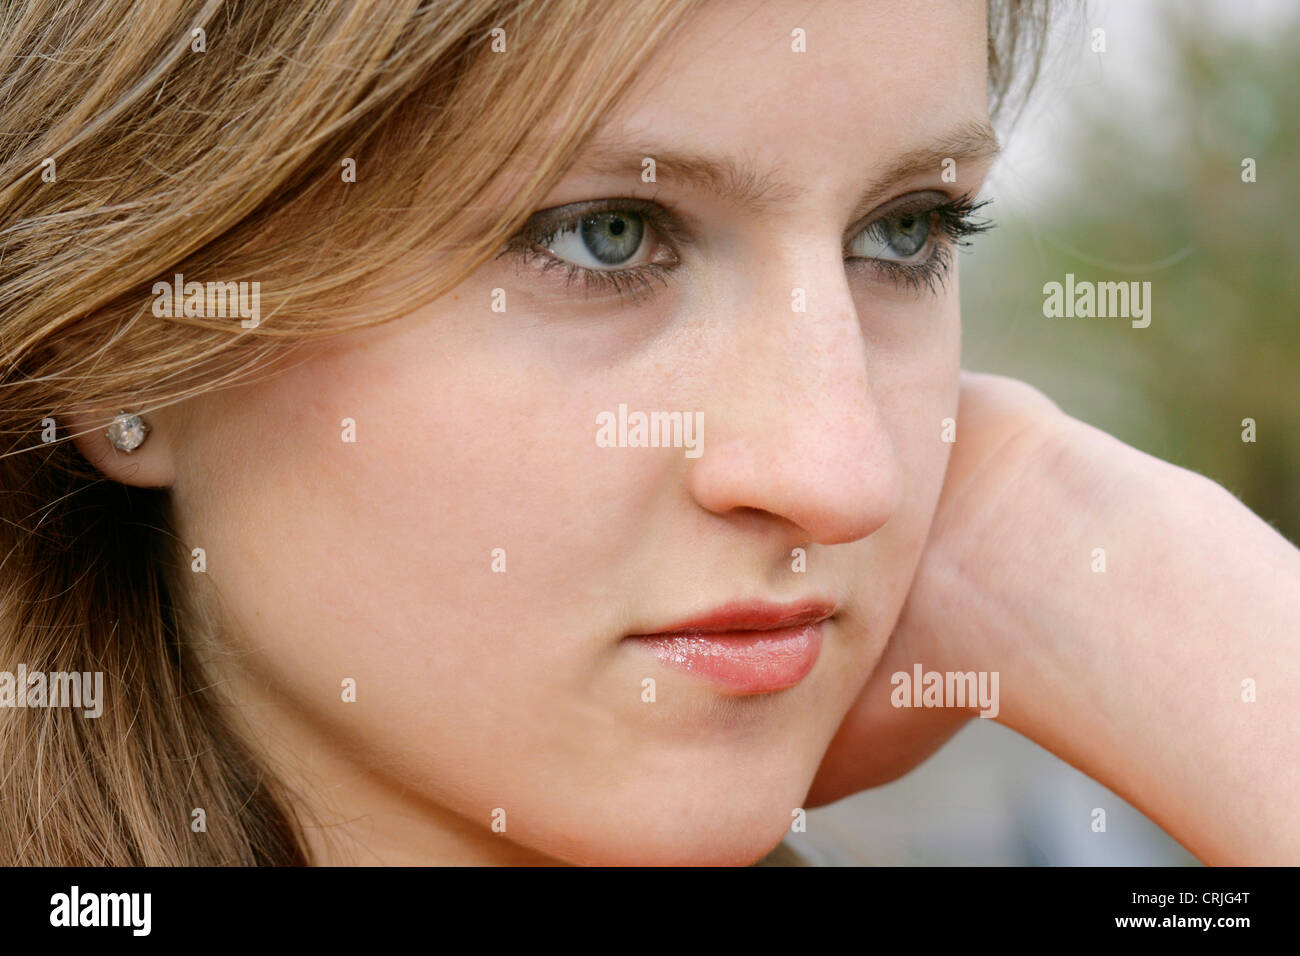 portrait of a thoughtful young woman Stock Photo